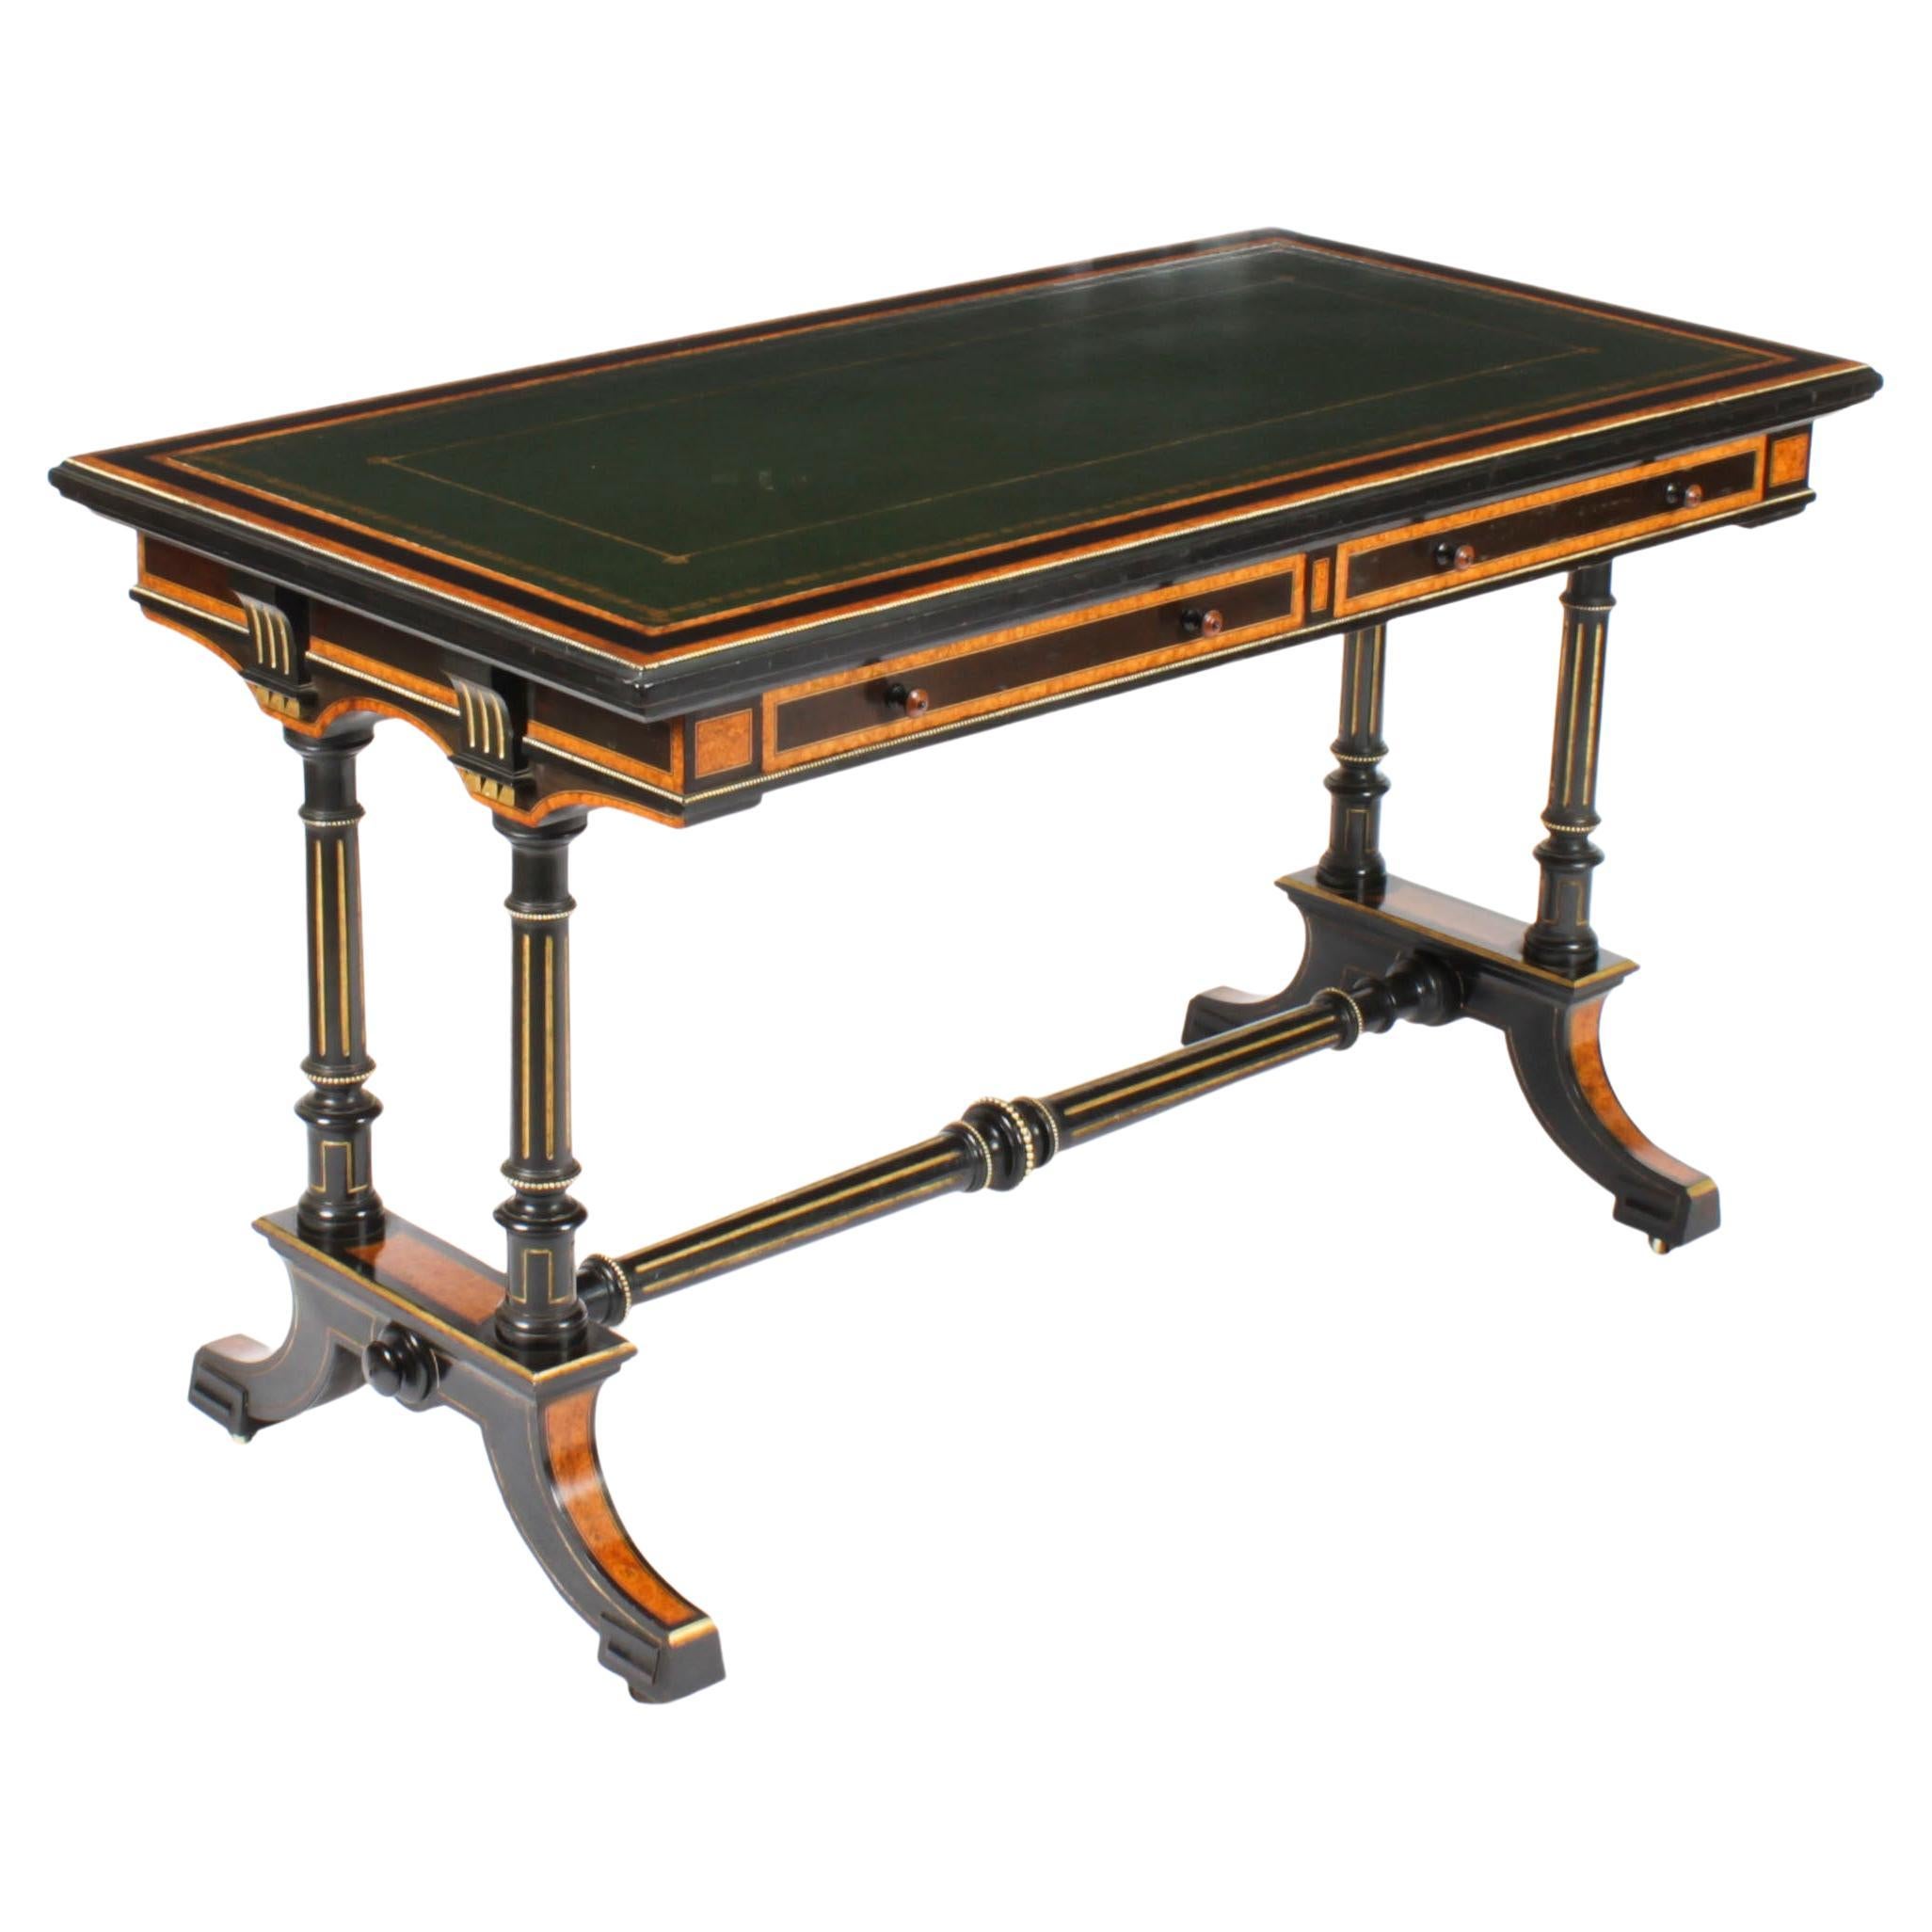 Antique Aesthetic Period Bur Maple Edward & Roberts Writing Table Desk, 19th C For Sale